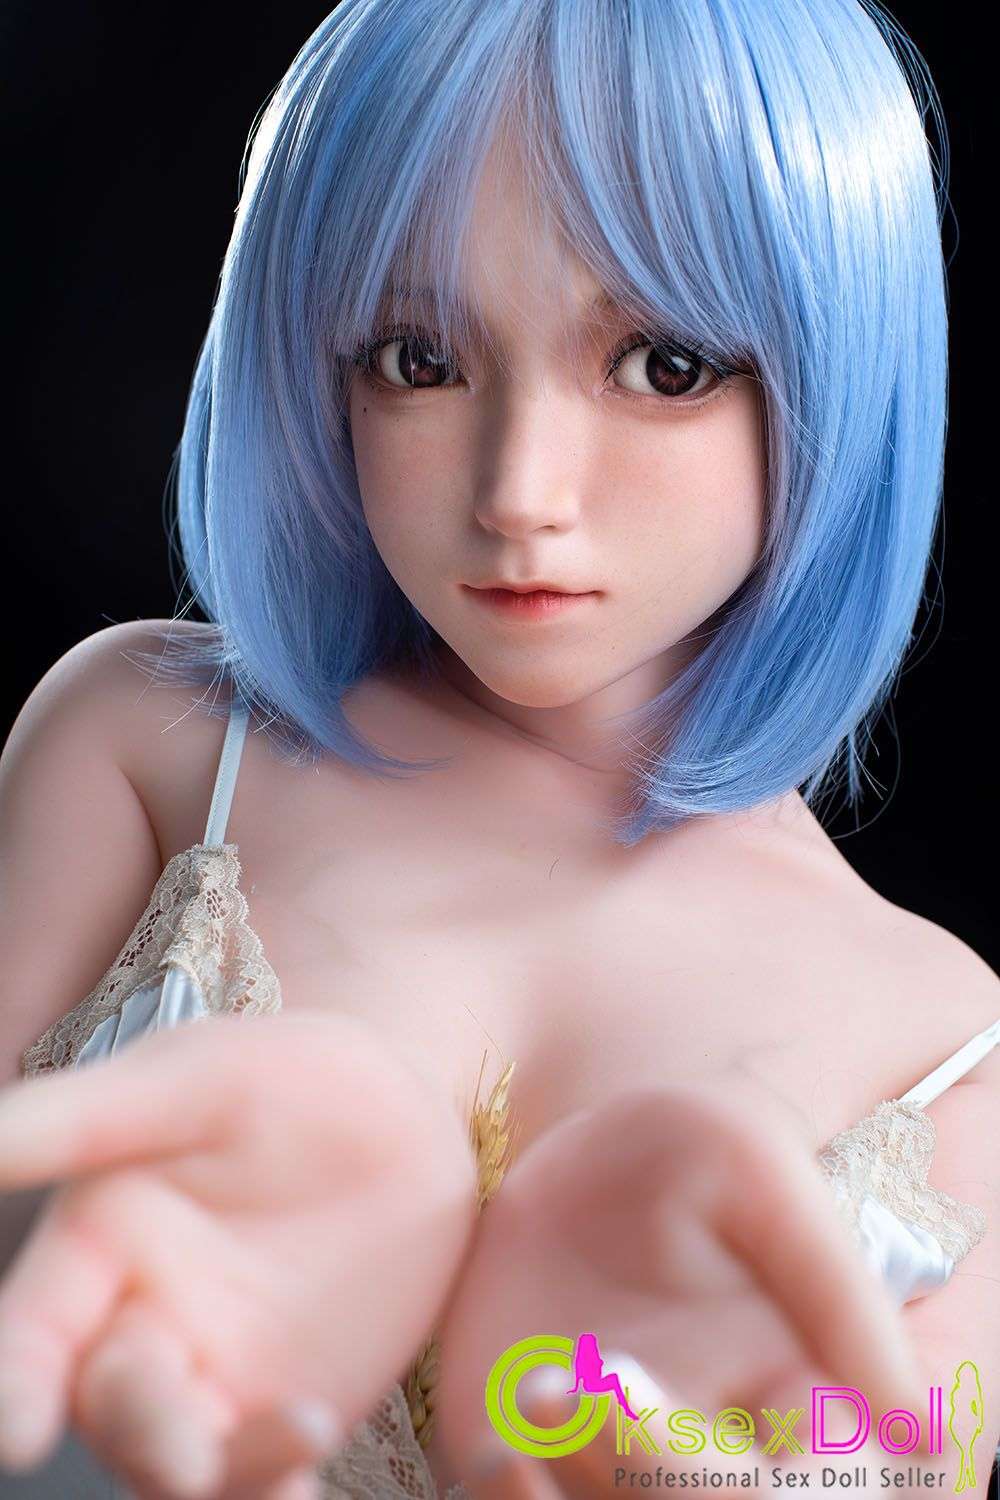 Cute Sex Doll Pictures of Skyler